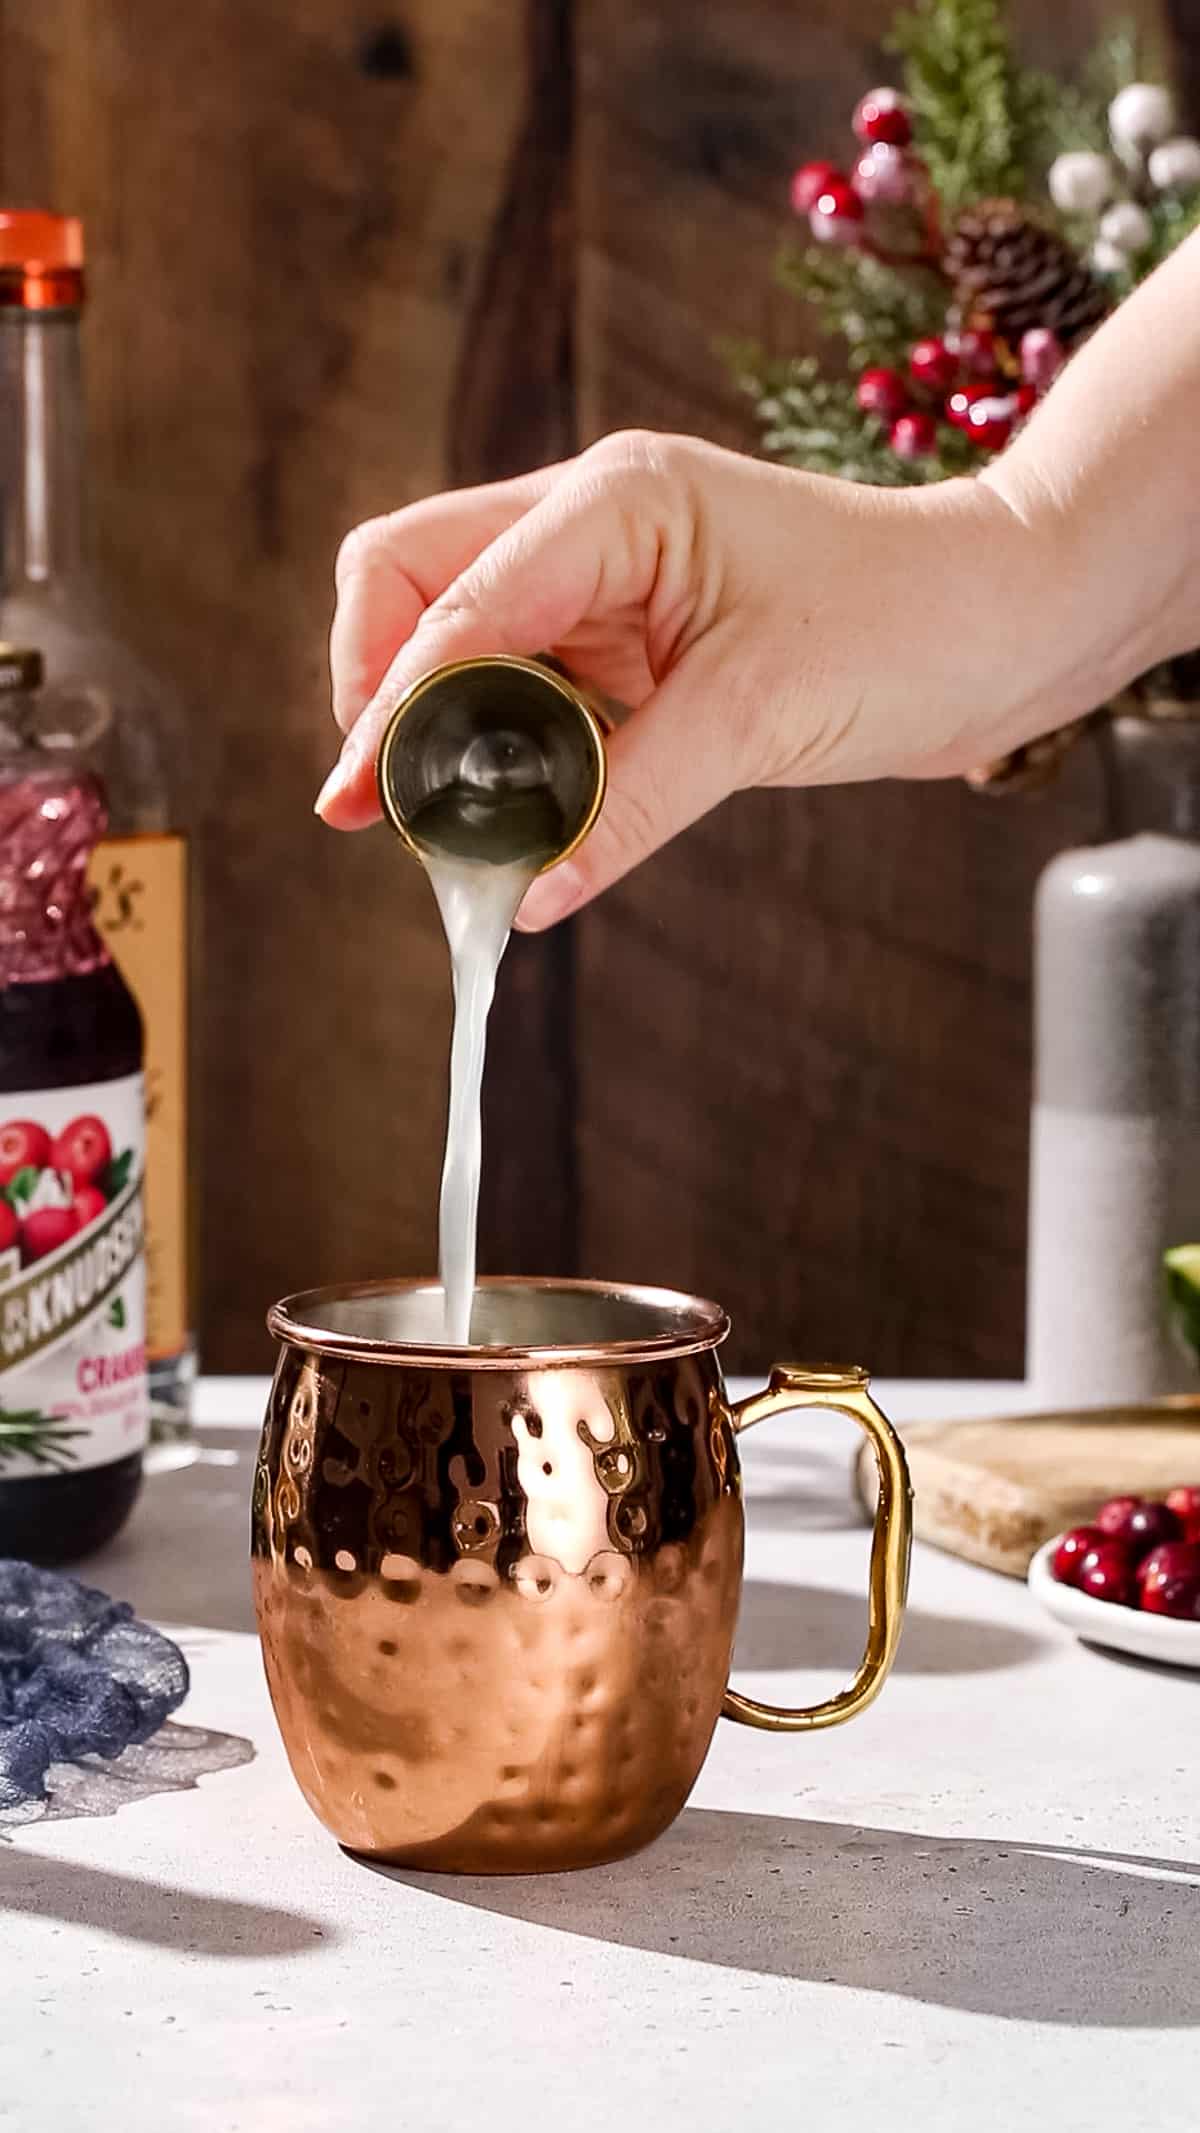 Hand pouring lime juice into a copper mug.